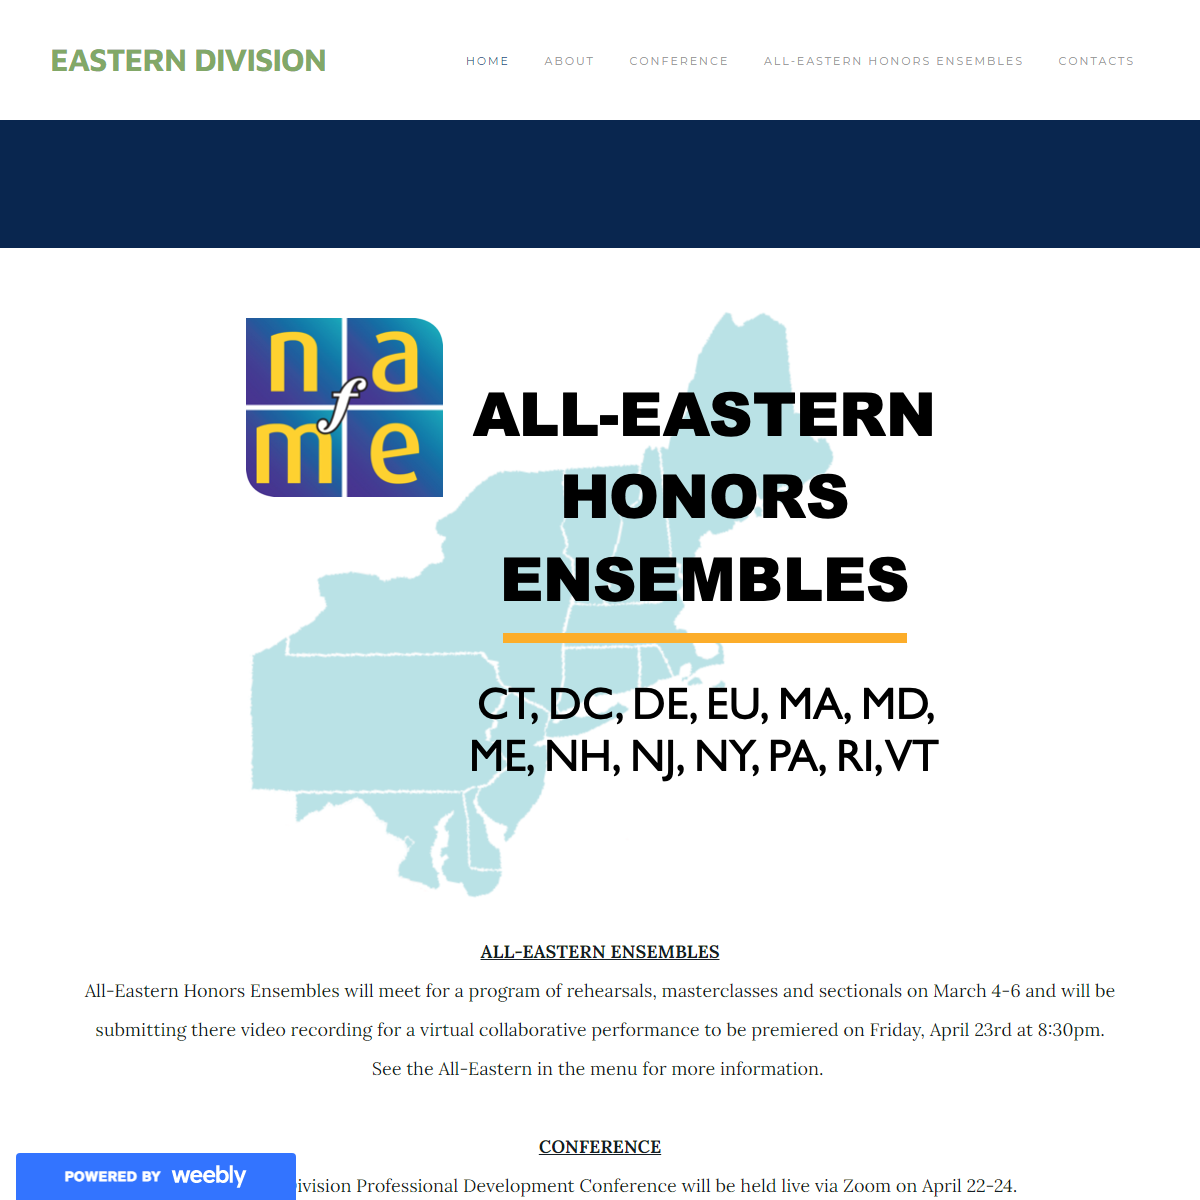 A complete backup of http://2021easterndivision.weebly.com/